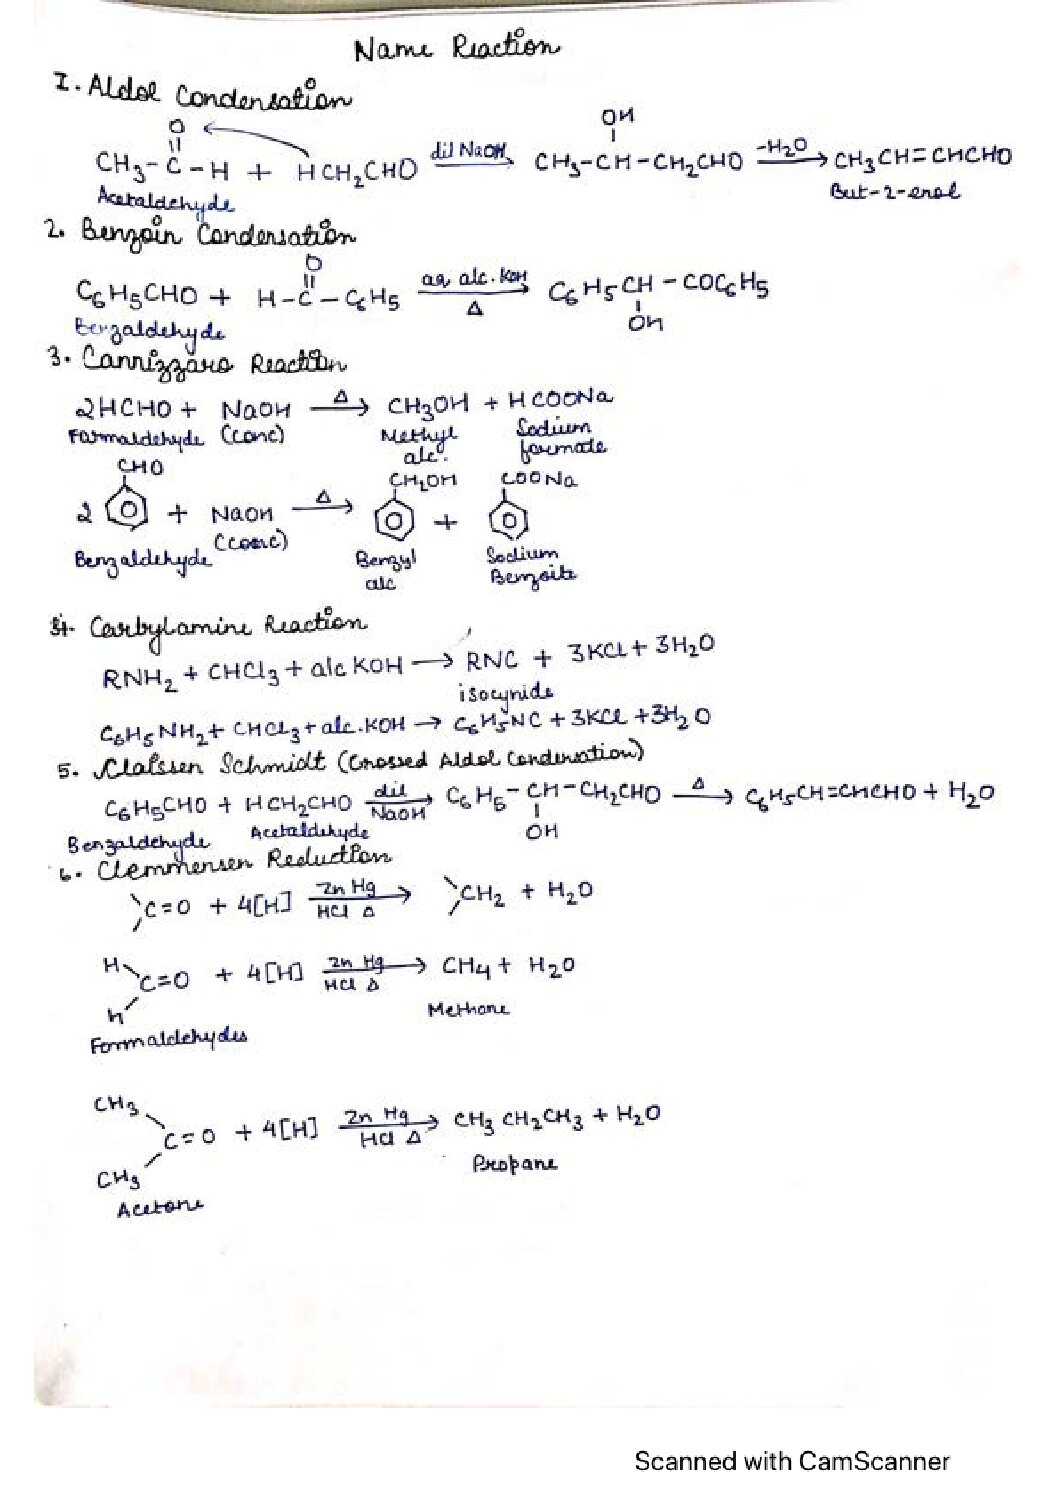 All Named Reactions Organic Chemistry Isc Cbse Ncert Class